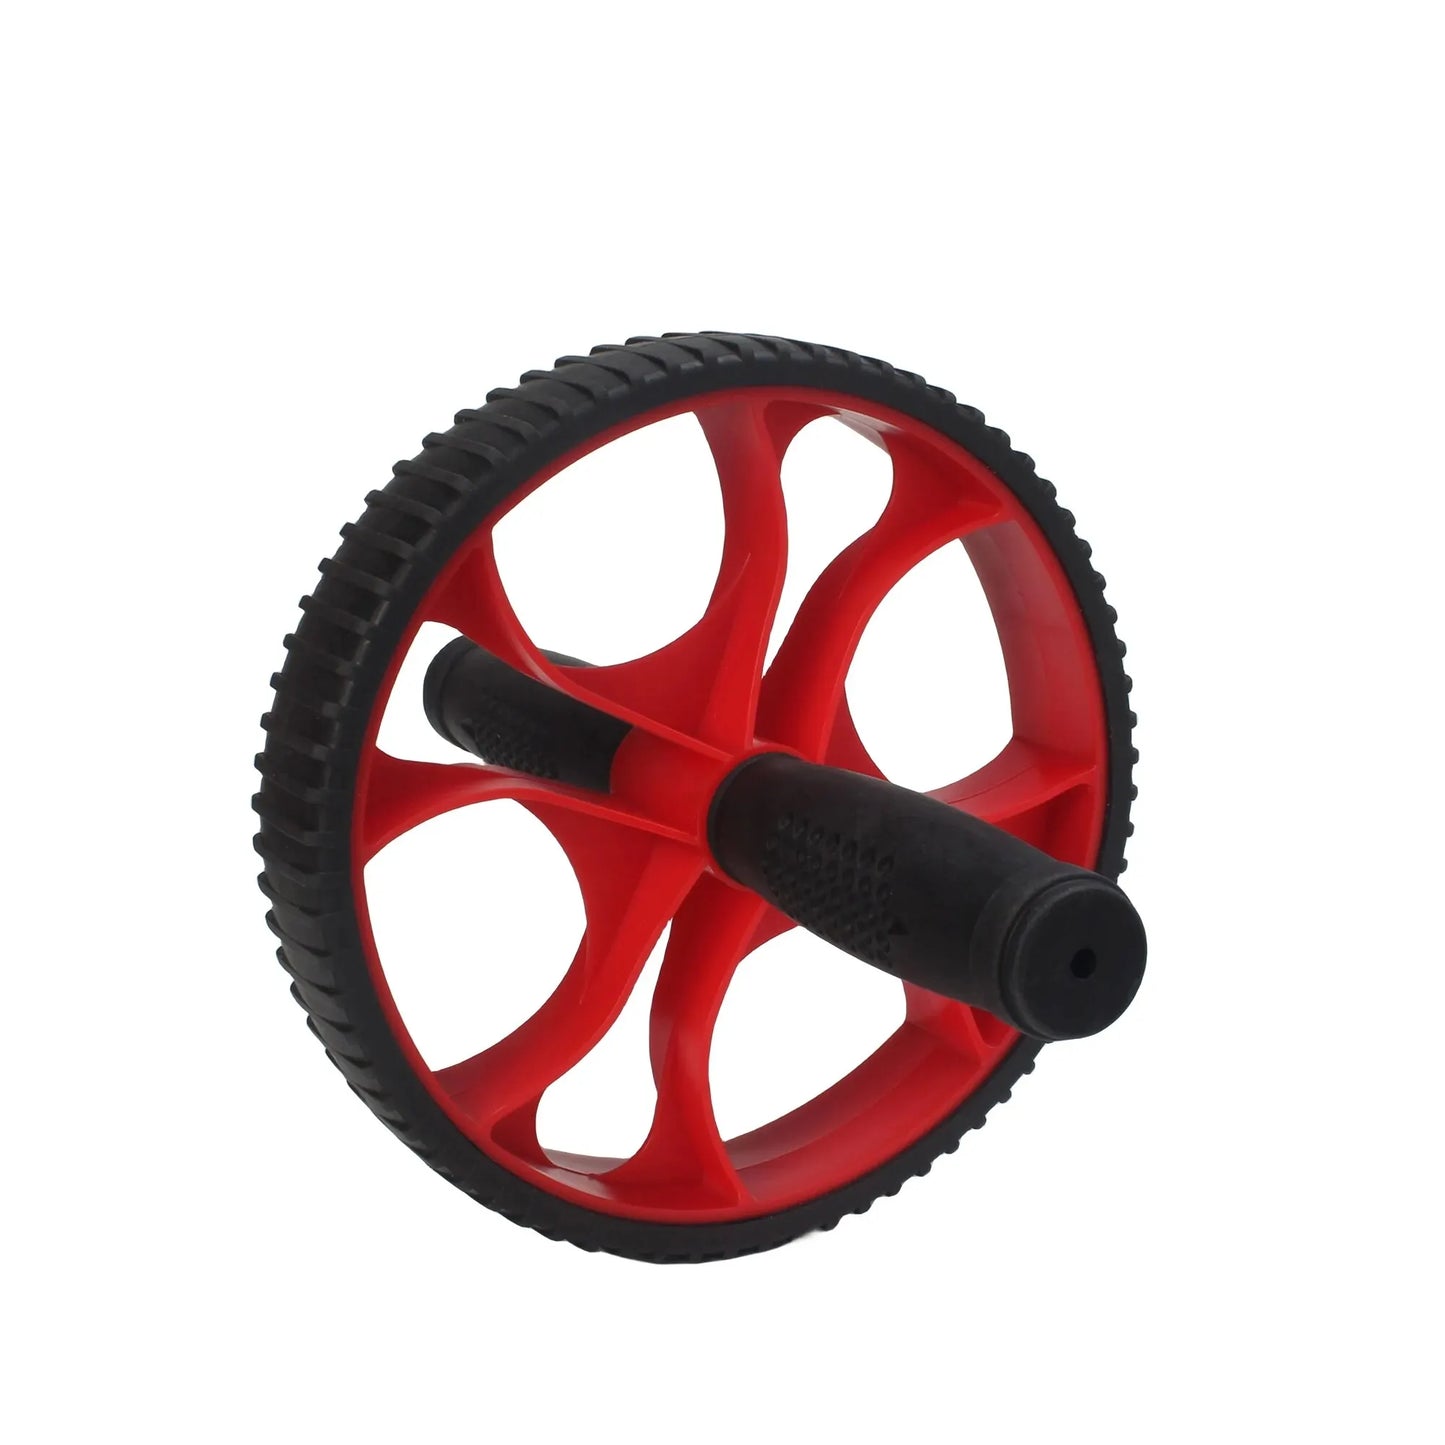 AB Roller For Gym And Home Exercise Abdominal Exercise Wheel For Core Workout